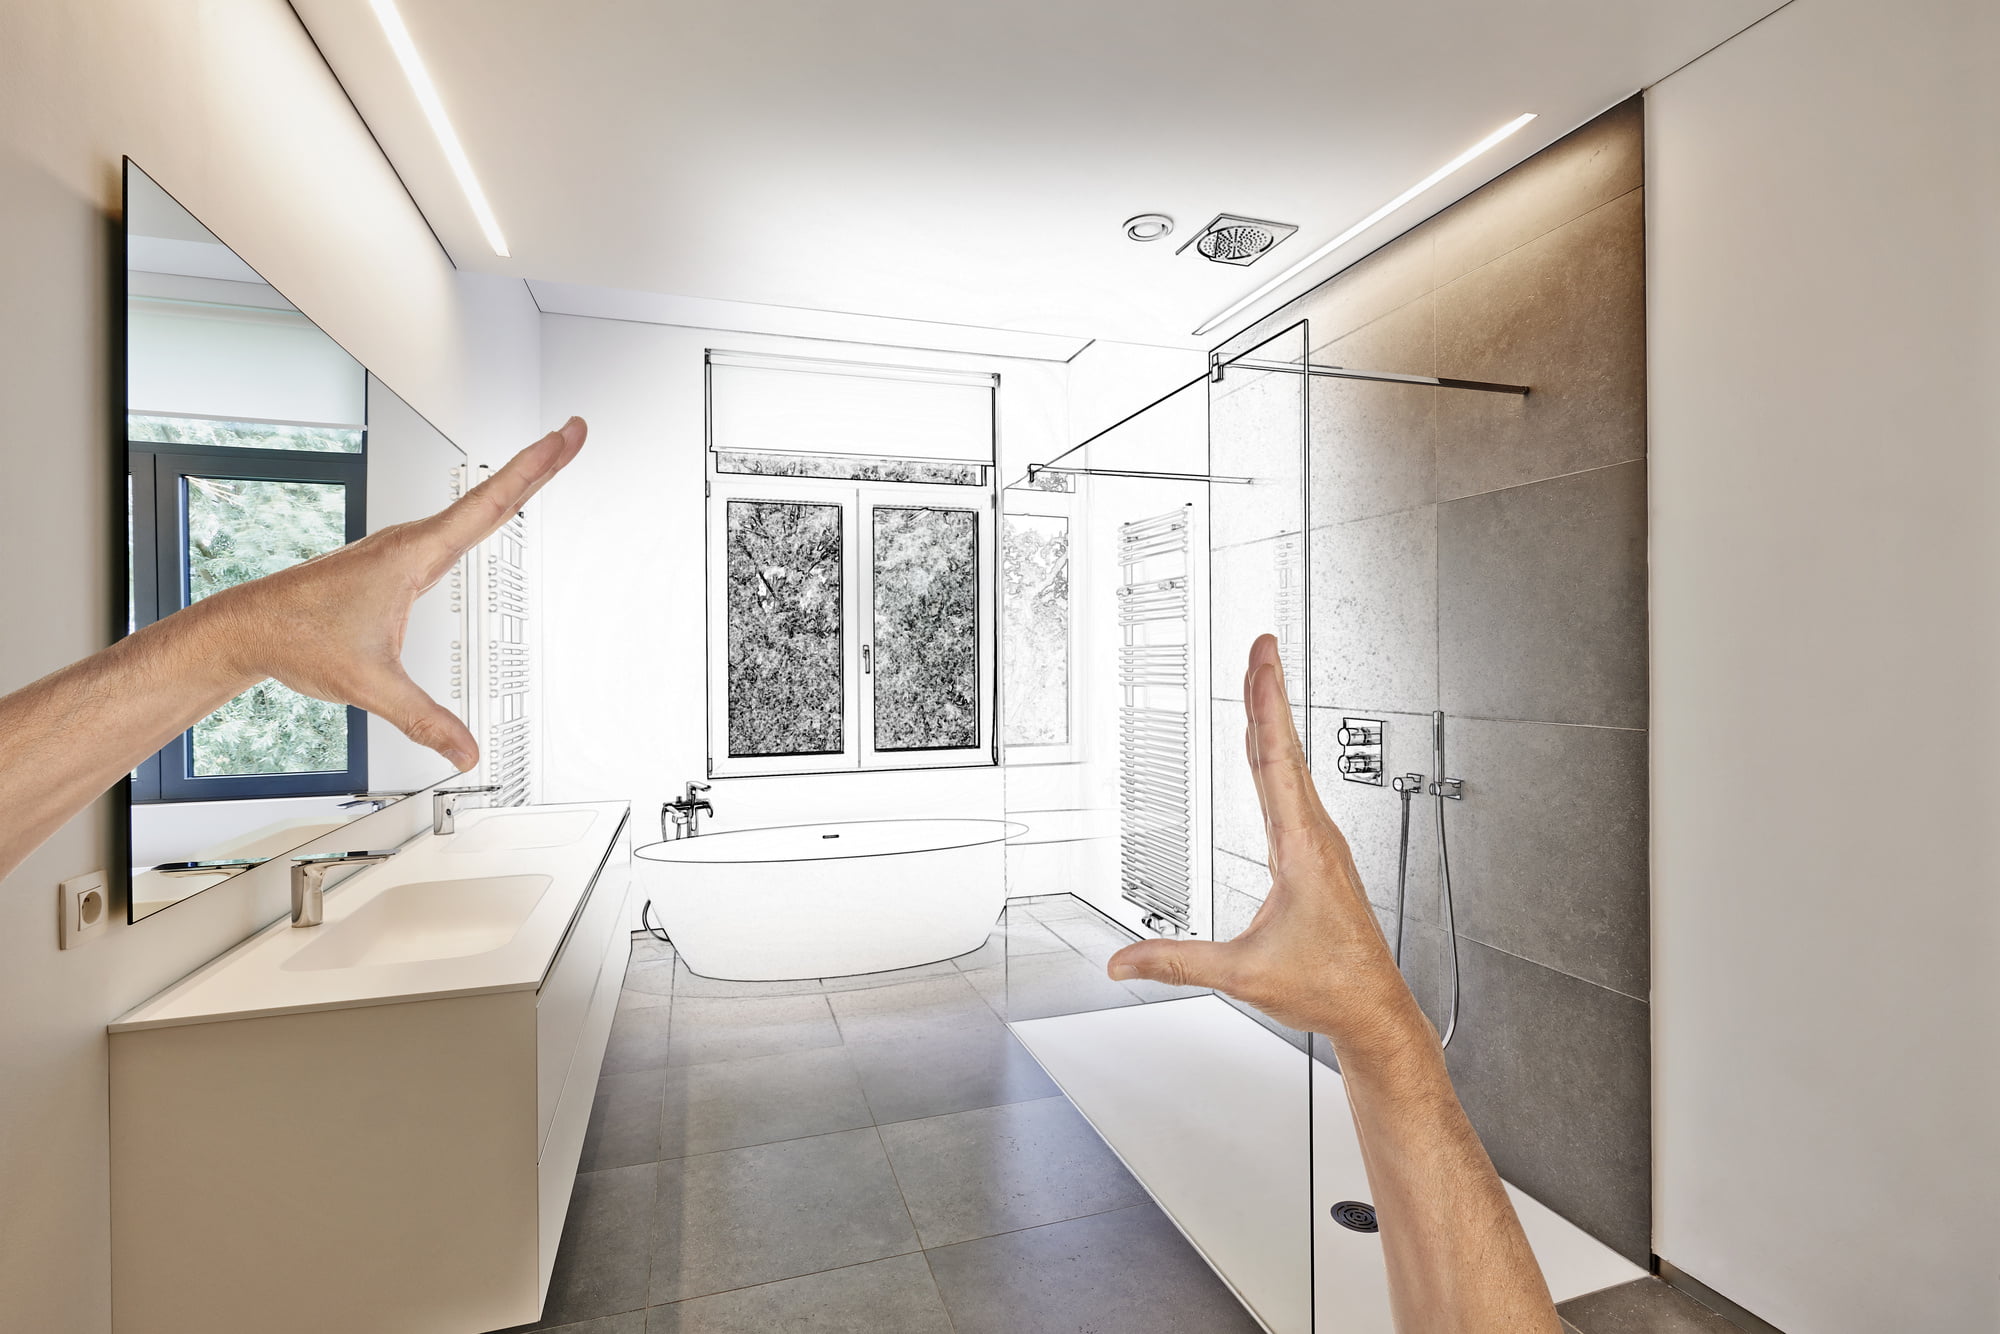 If you want to give your bathroom a new look, this guide can help. Here is everything you need to know about planning bathroom remodels.